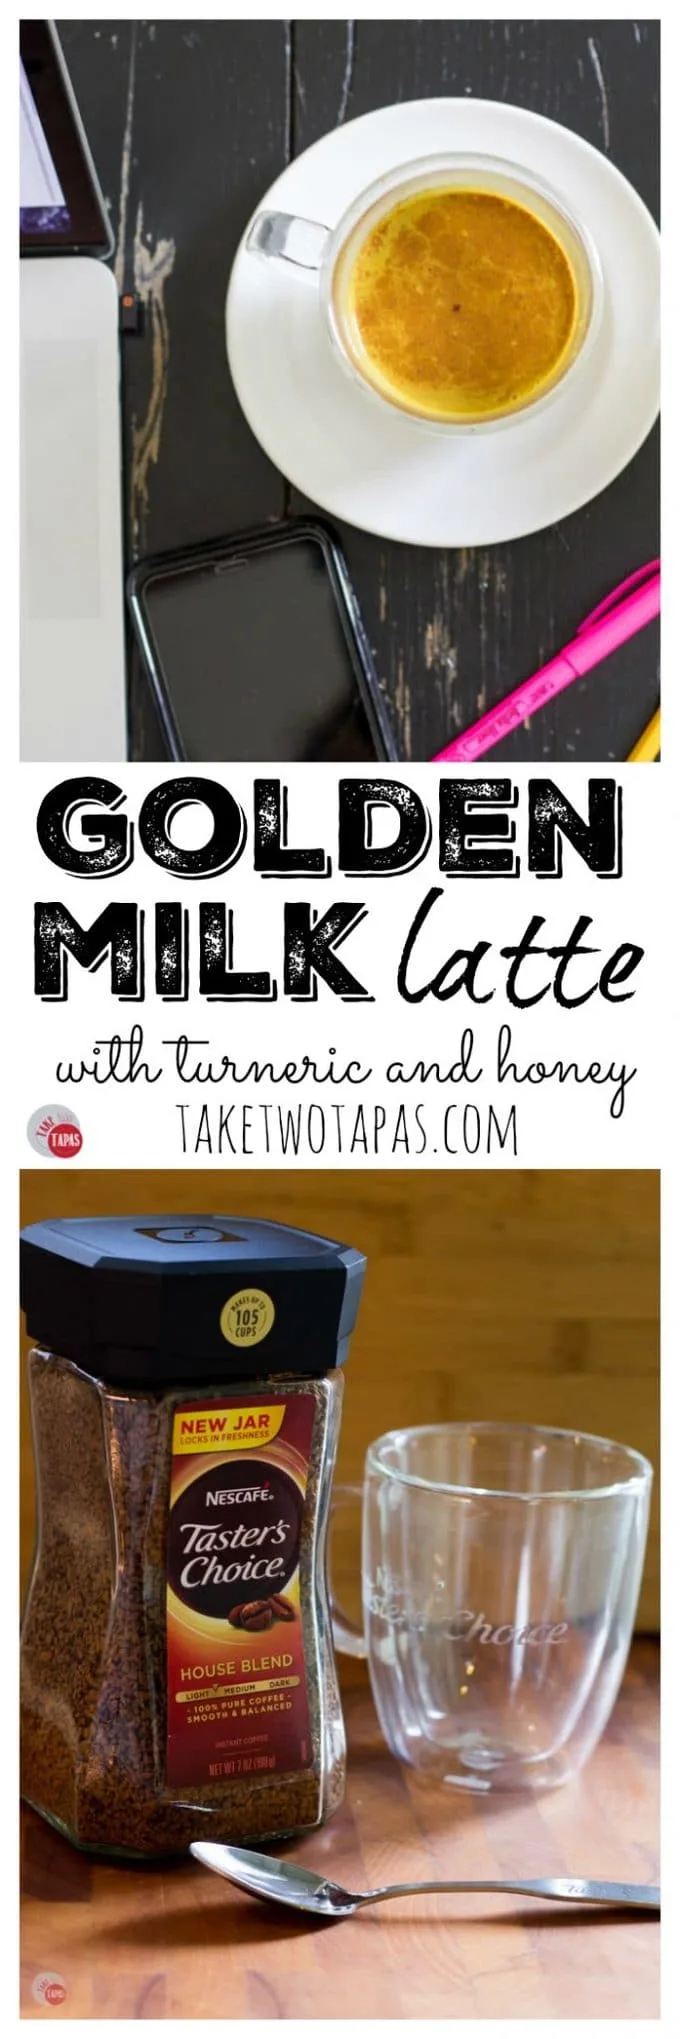 Pinterest collage image with text "golden milk latte with turmeric and honey"